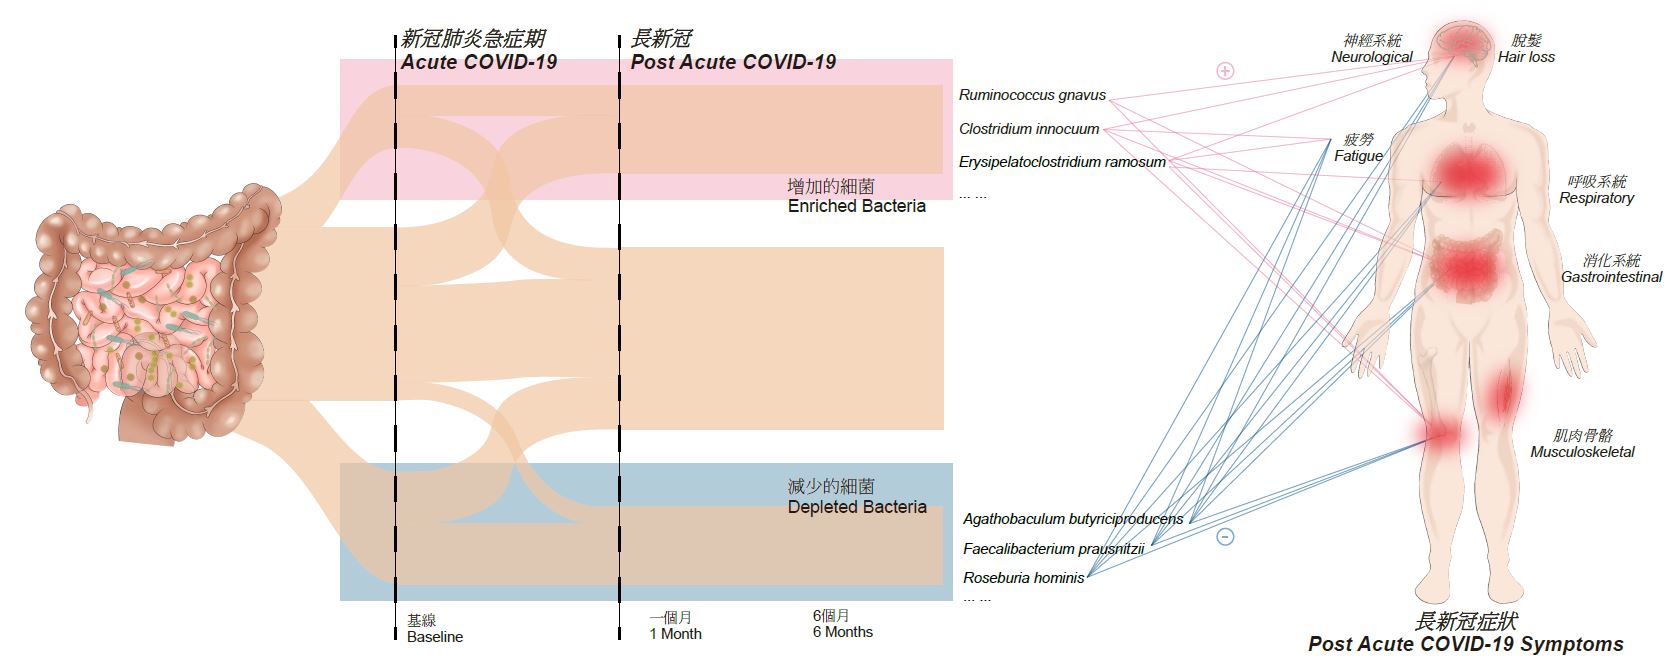 Schematic diagram showing the association between gut microbiome composition and long COVID